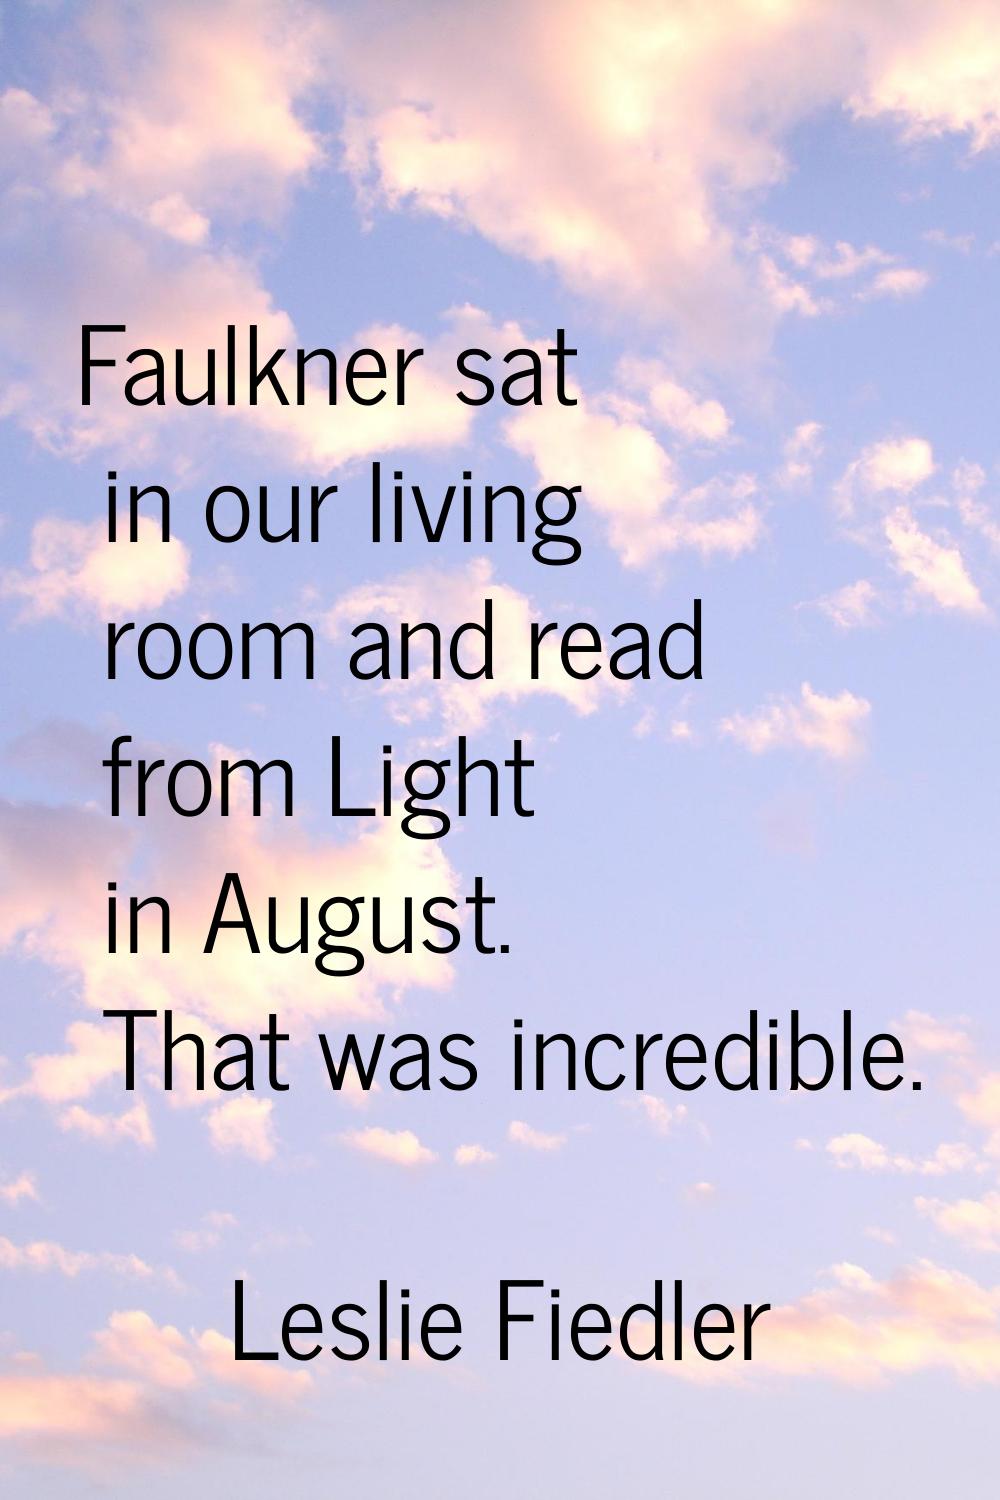 Faulkner sat in our living room and read from Light in August. That was incredible.